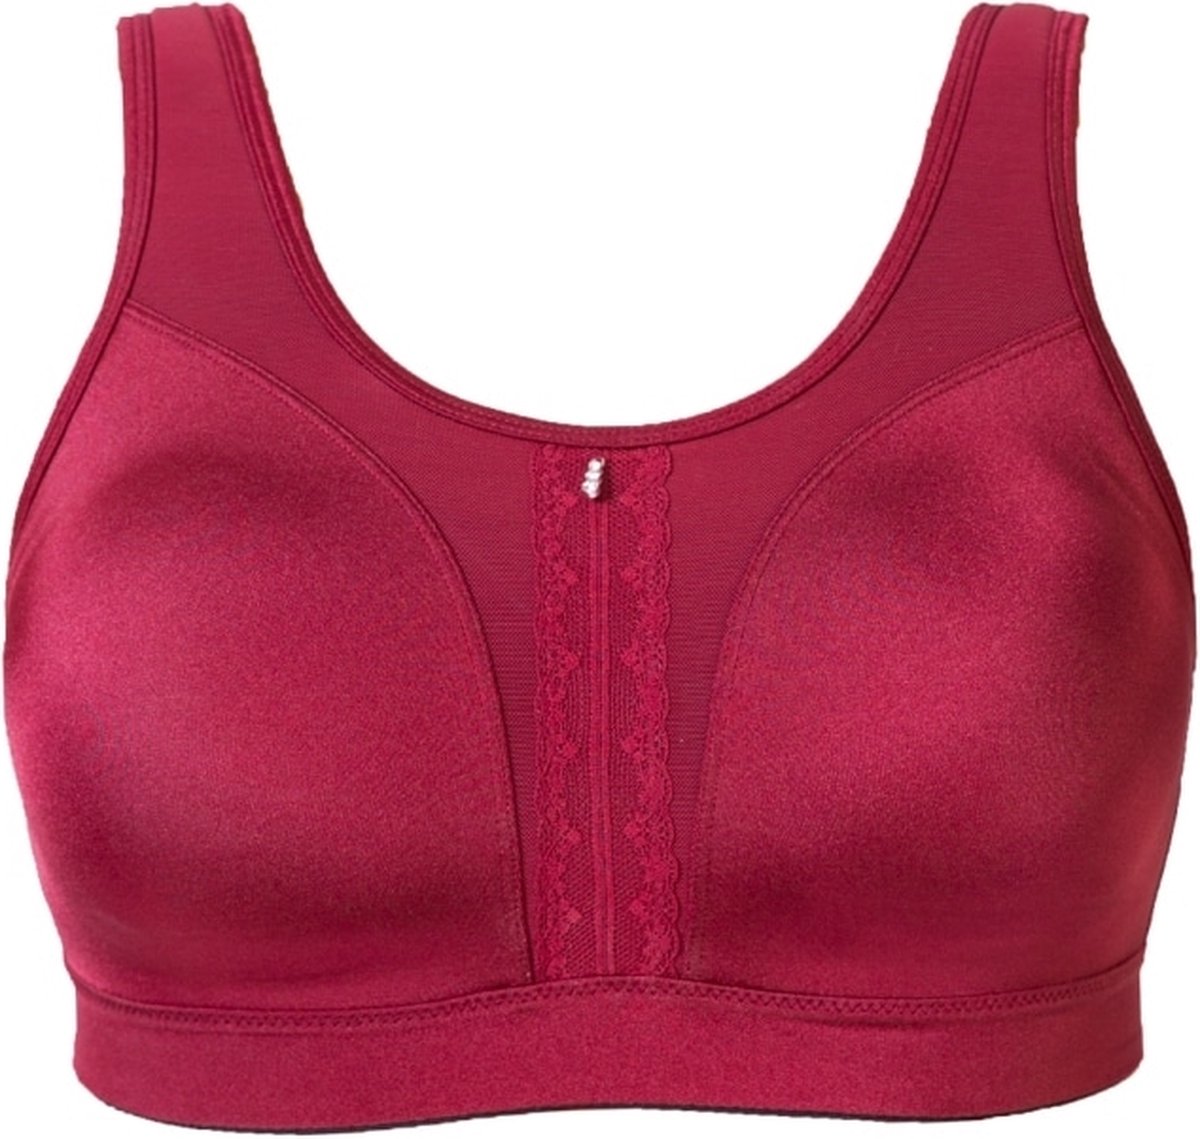 High impact Sport BH (zonder beugel) Cannes, Deep Red / Bordeaux rood, maat: 85F